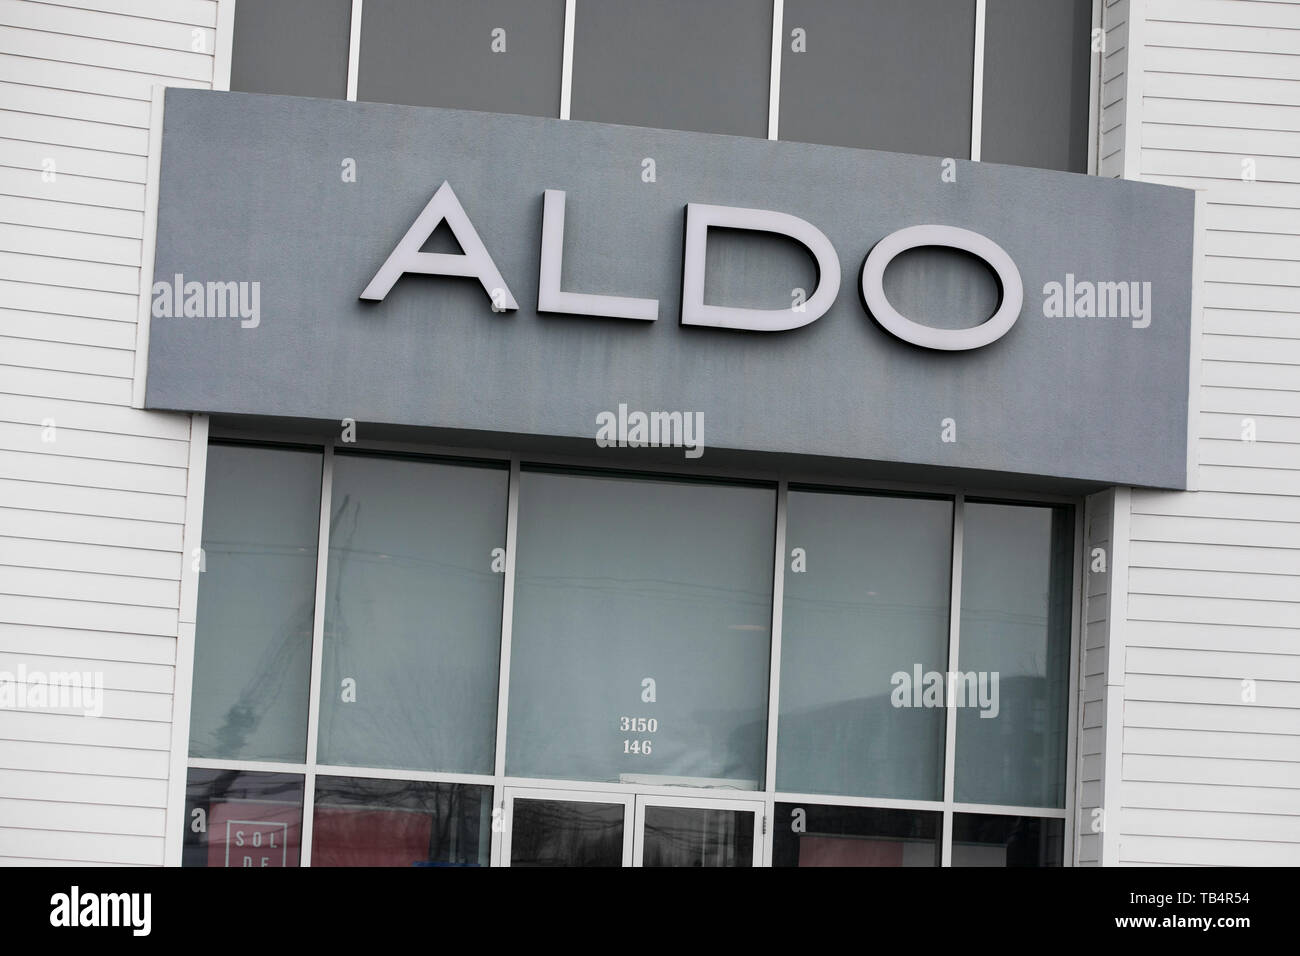 Aldo Logo High Resolution Stock Photography and Images - Alamy